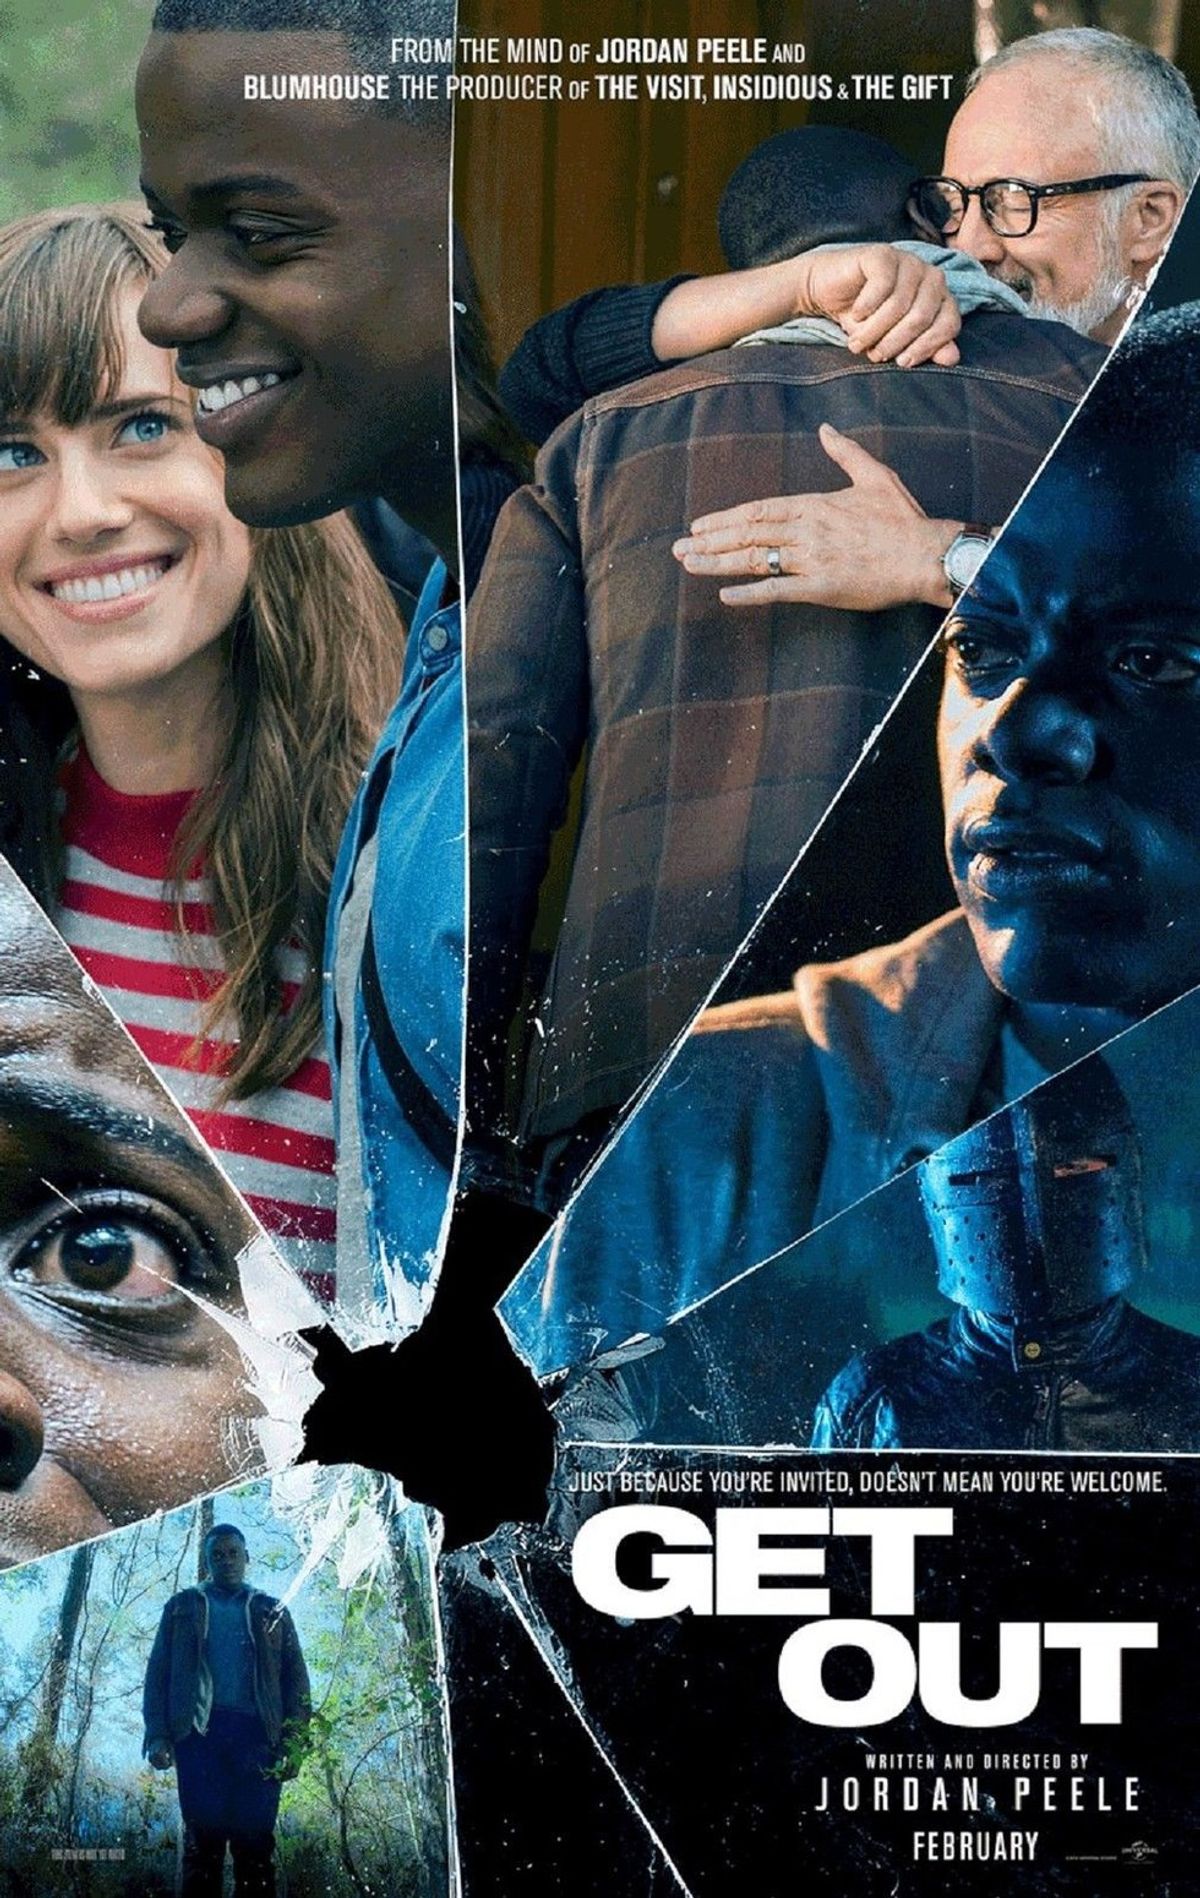 10 Hidden Messages In The Film 'Get Out'